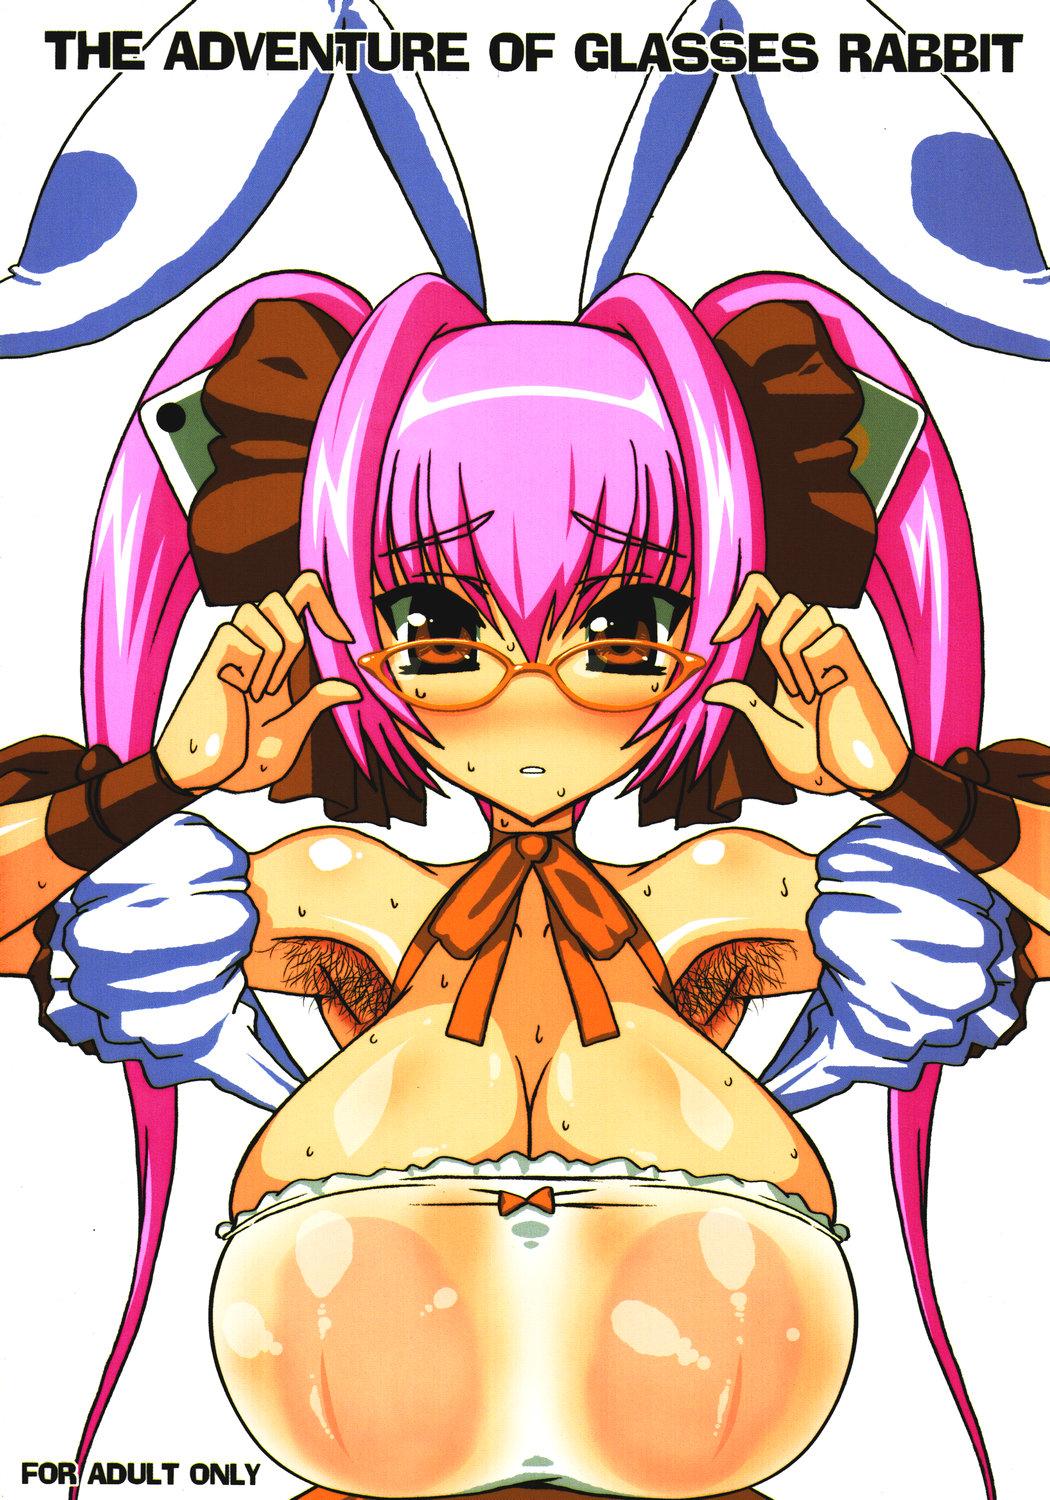 Pounding The Adventure of glasses rabbit - Di gi charat Big breasts - Picture 1